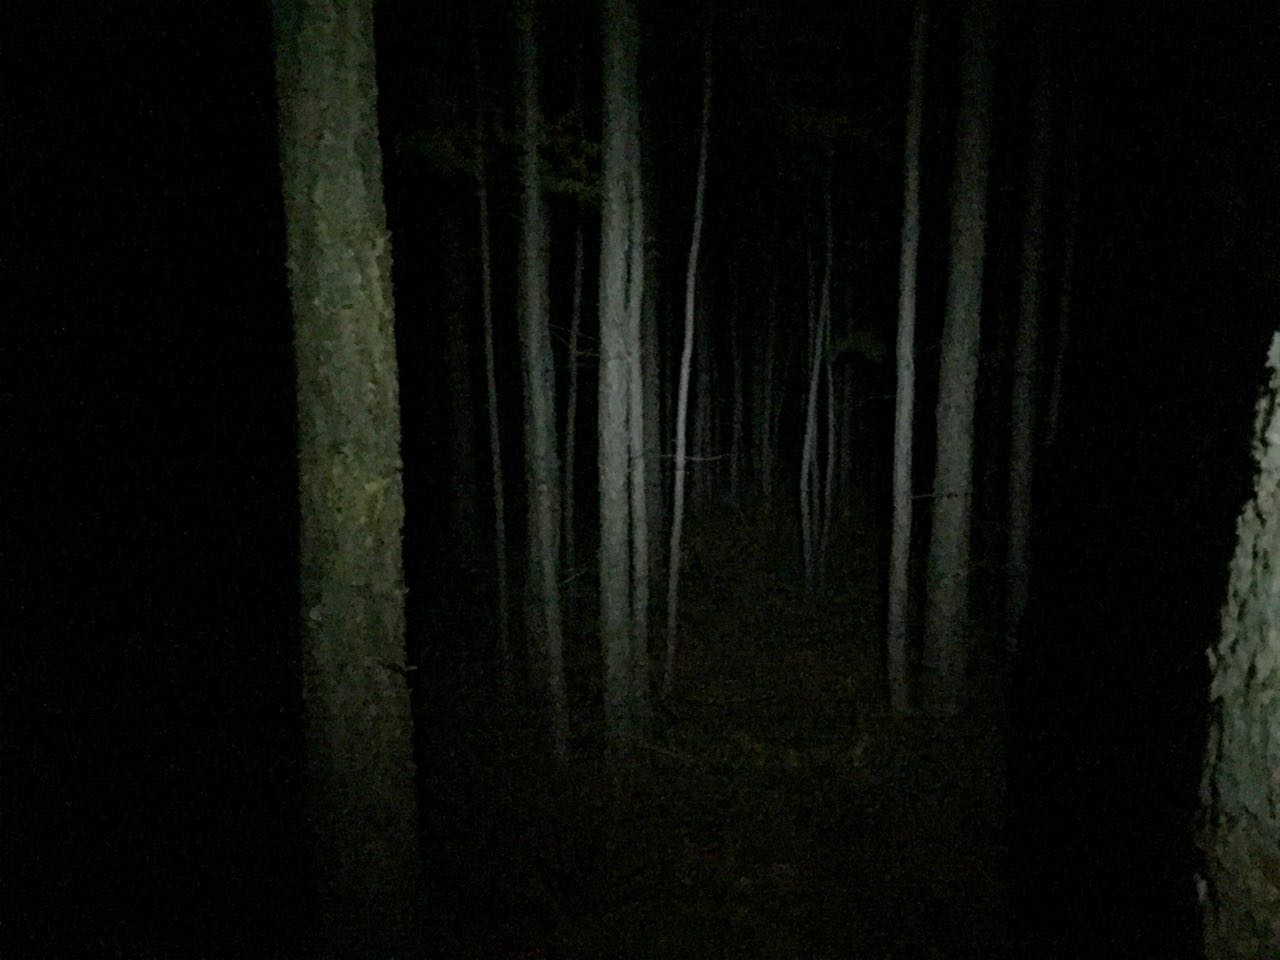 quite creepy to go there at night, anyone remember Blairwitch Project?